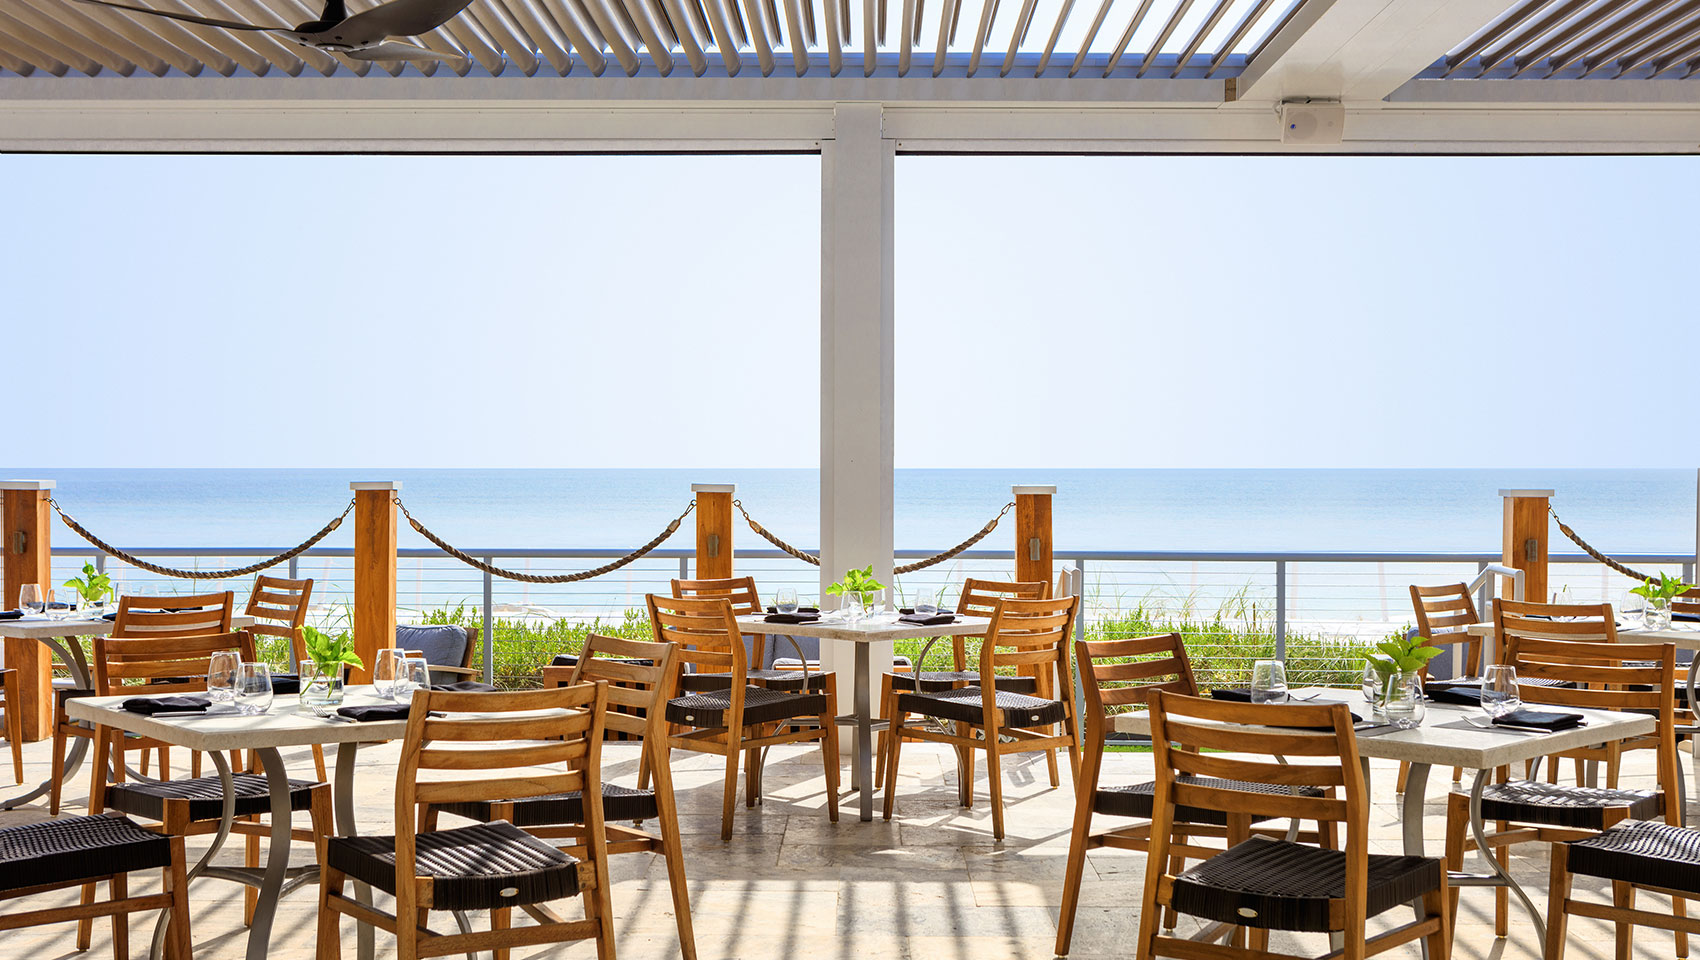 Oceanfront dining at Heaton’s Reef